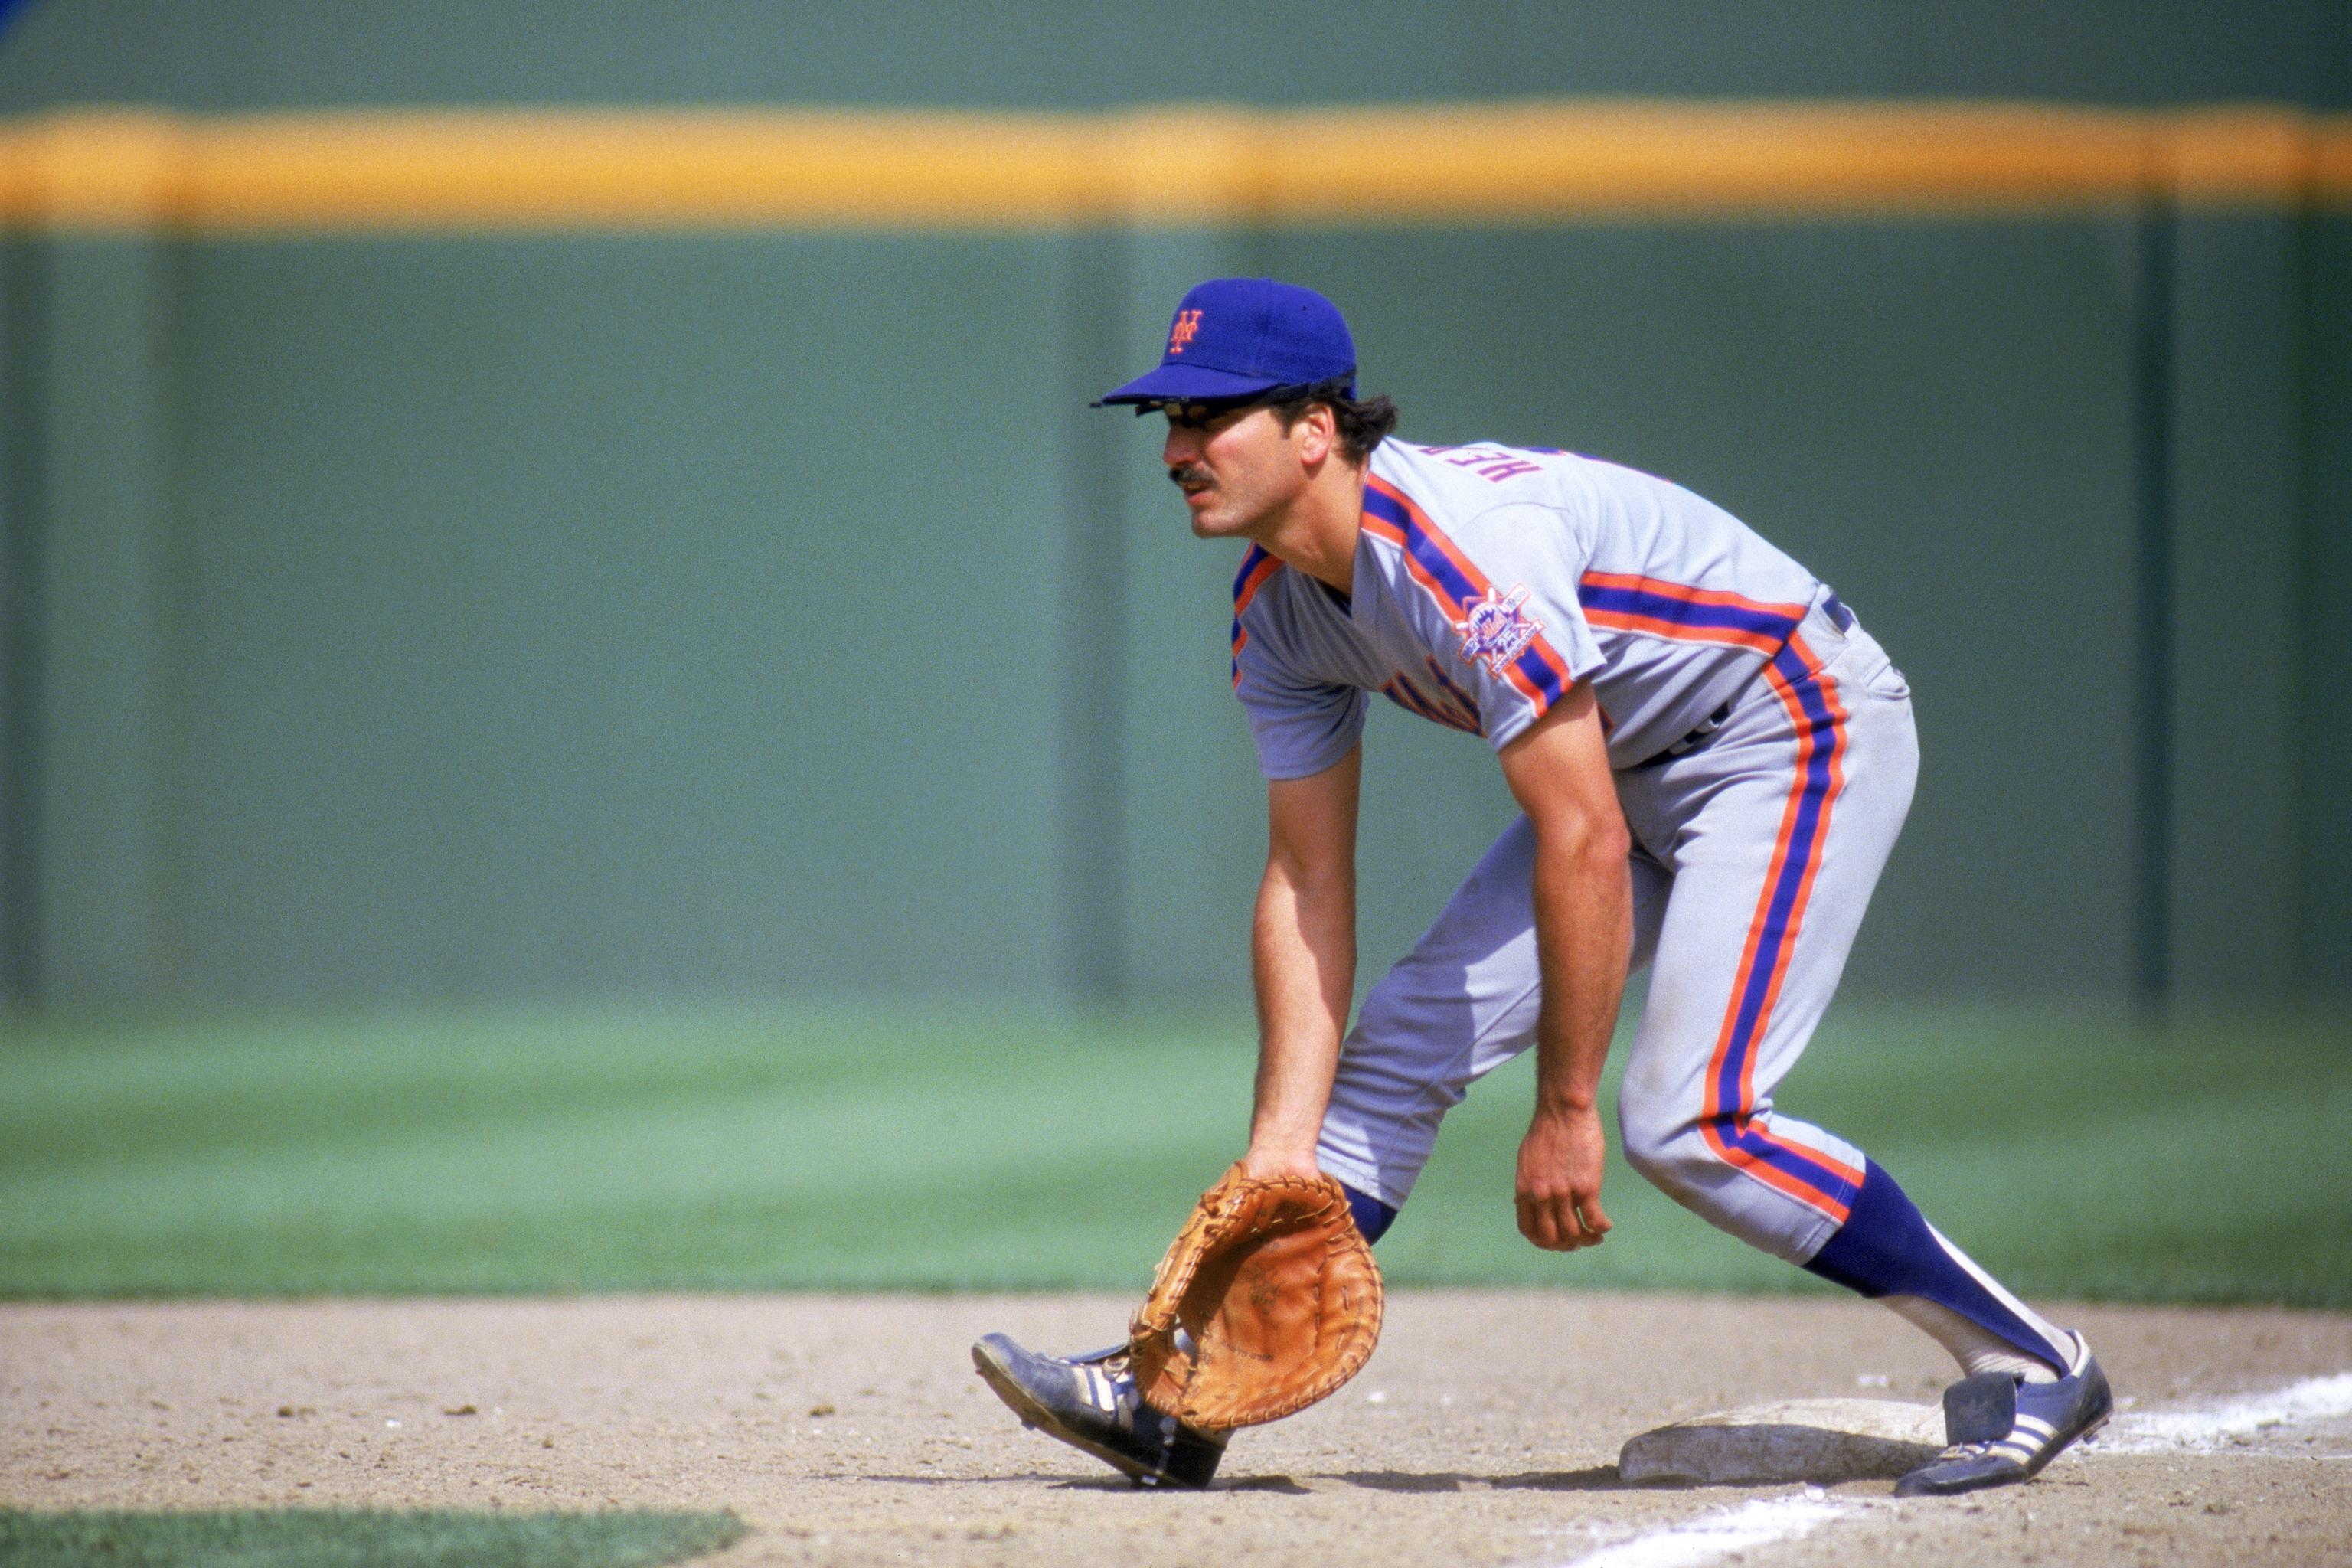 Keith Hernandez Used Cocaine and Was Forced to Name Others